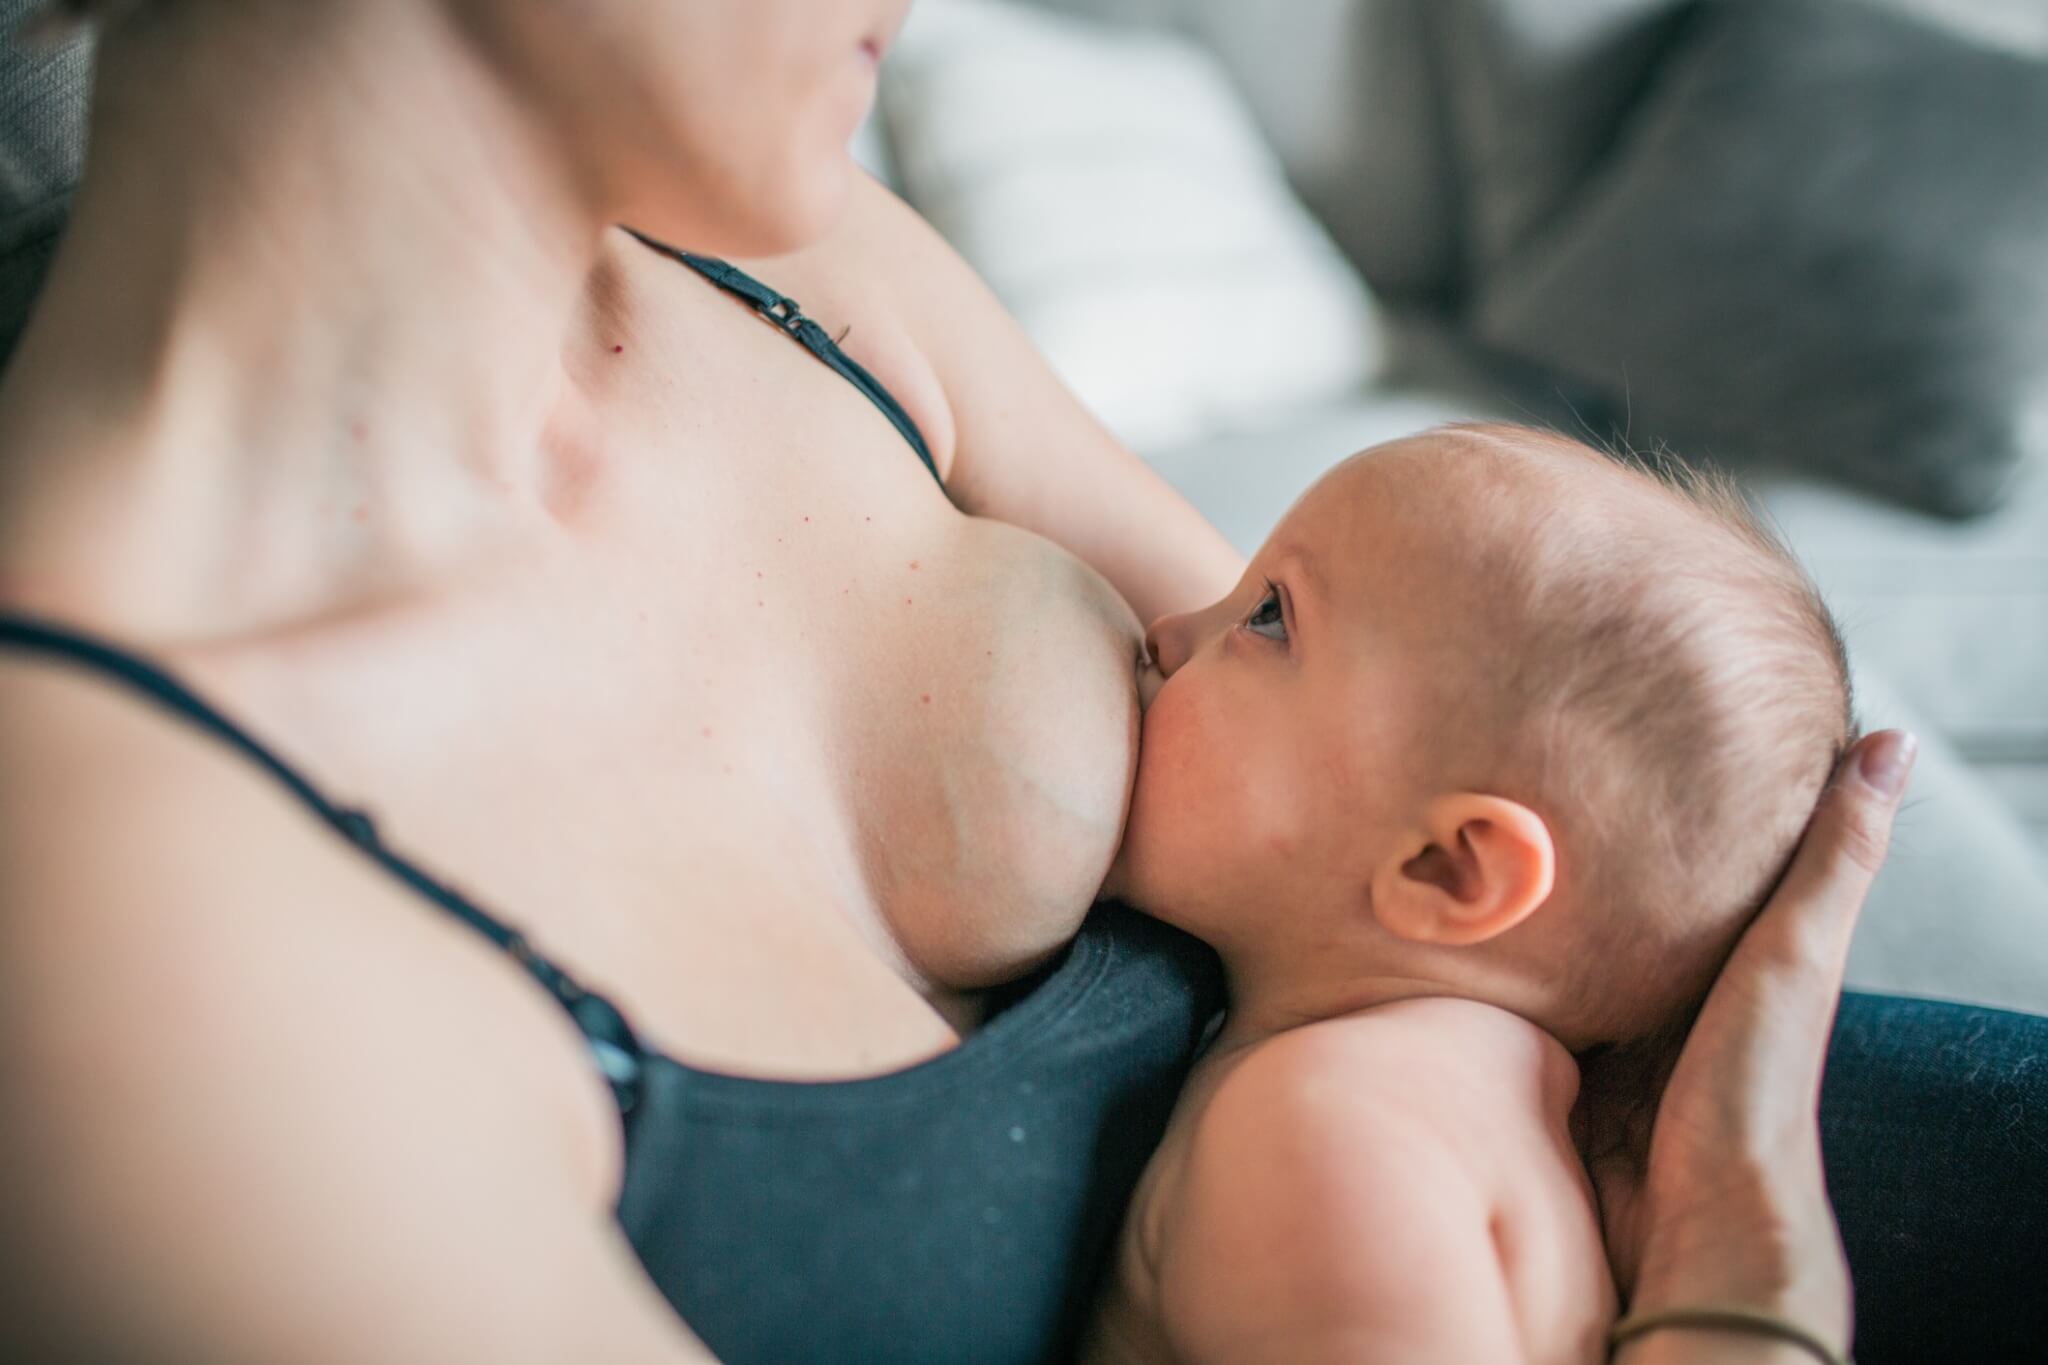 Only One Breast Works When Breastfeeding